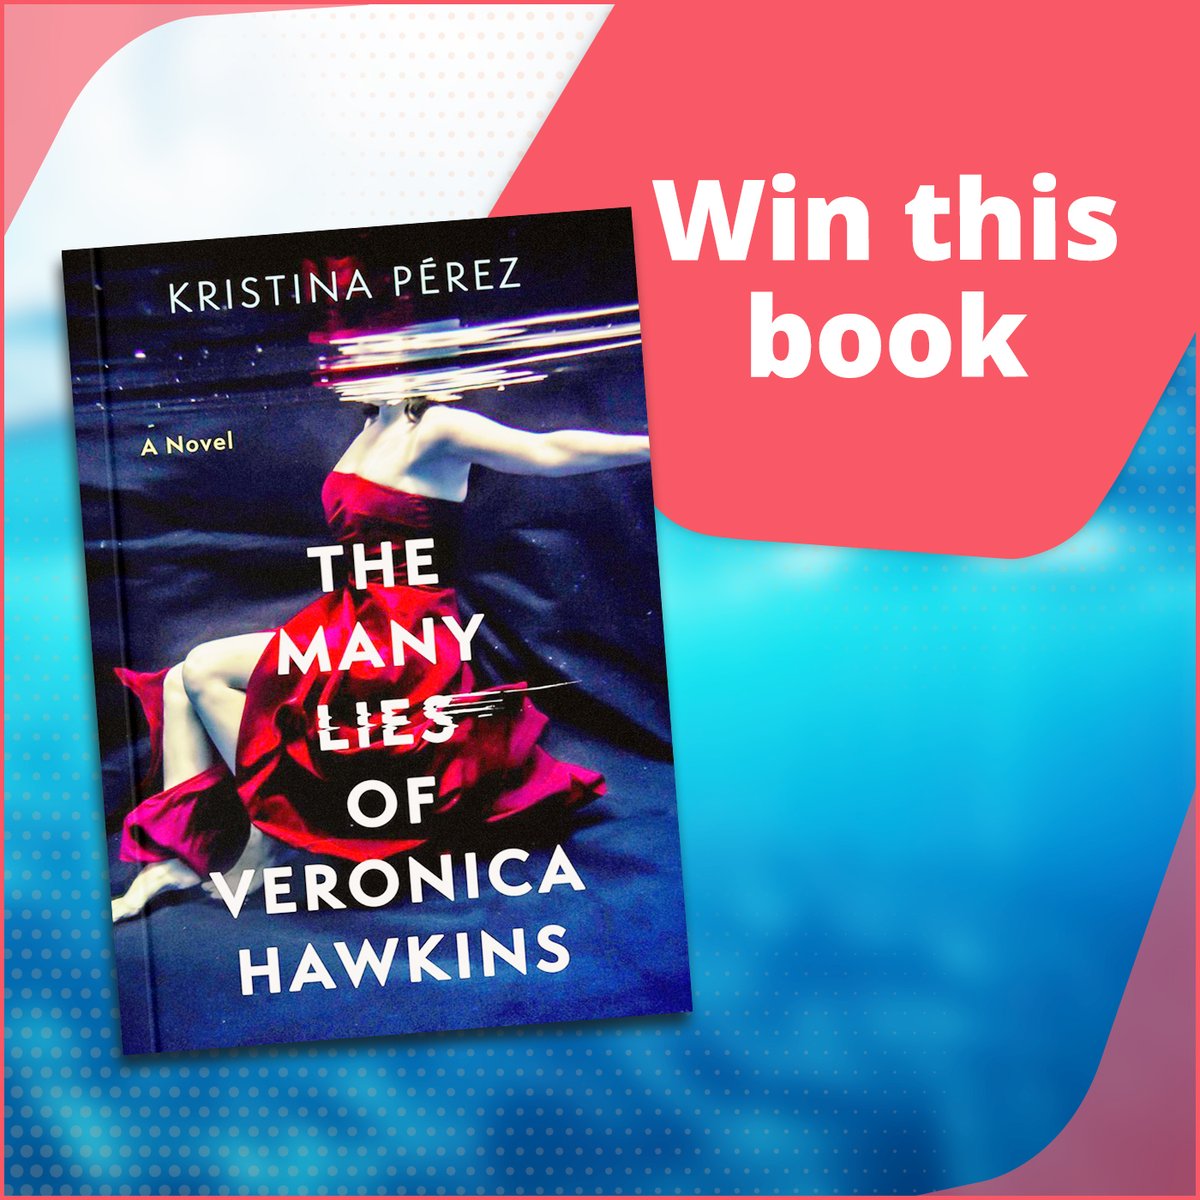 WIN THIS BOOK – This week, we’re giving away three copies of The Many Lies of Veronica Hawkins by Kristina Perez. To win, enter here: writerscentre.com.au/win